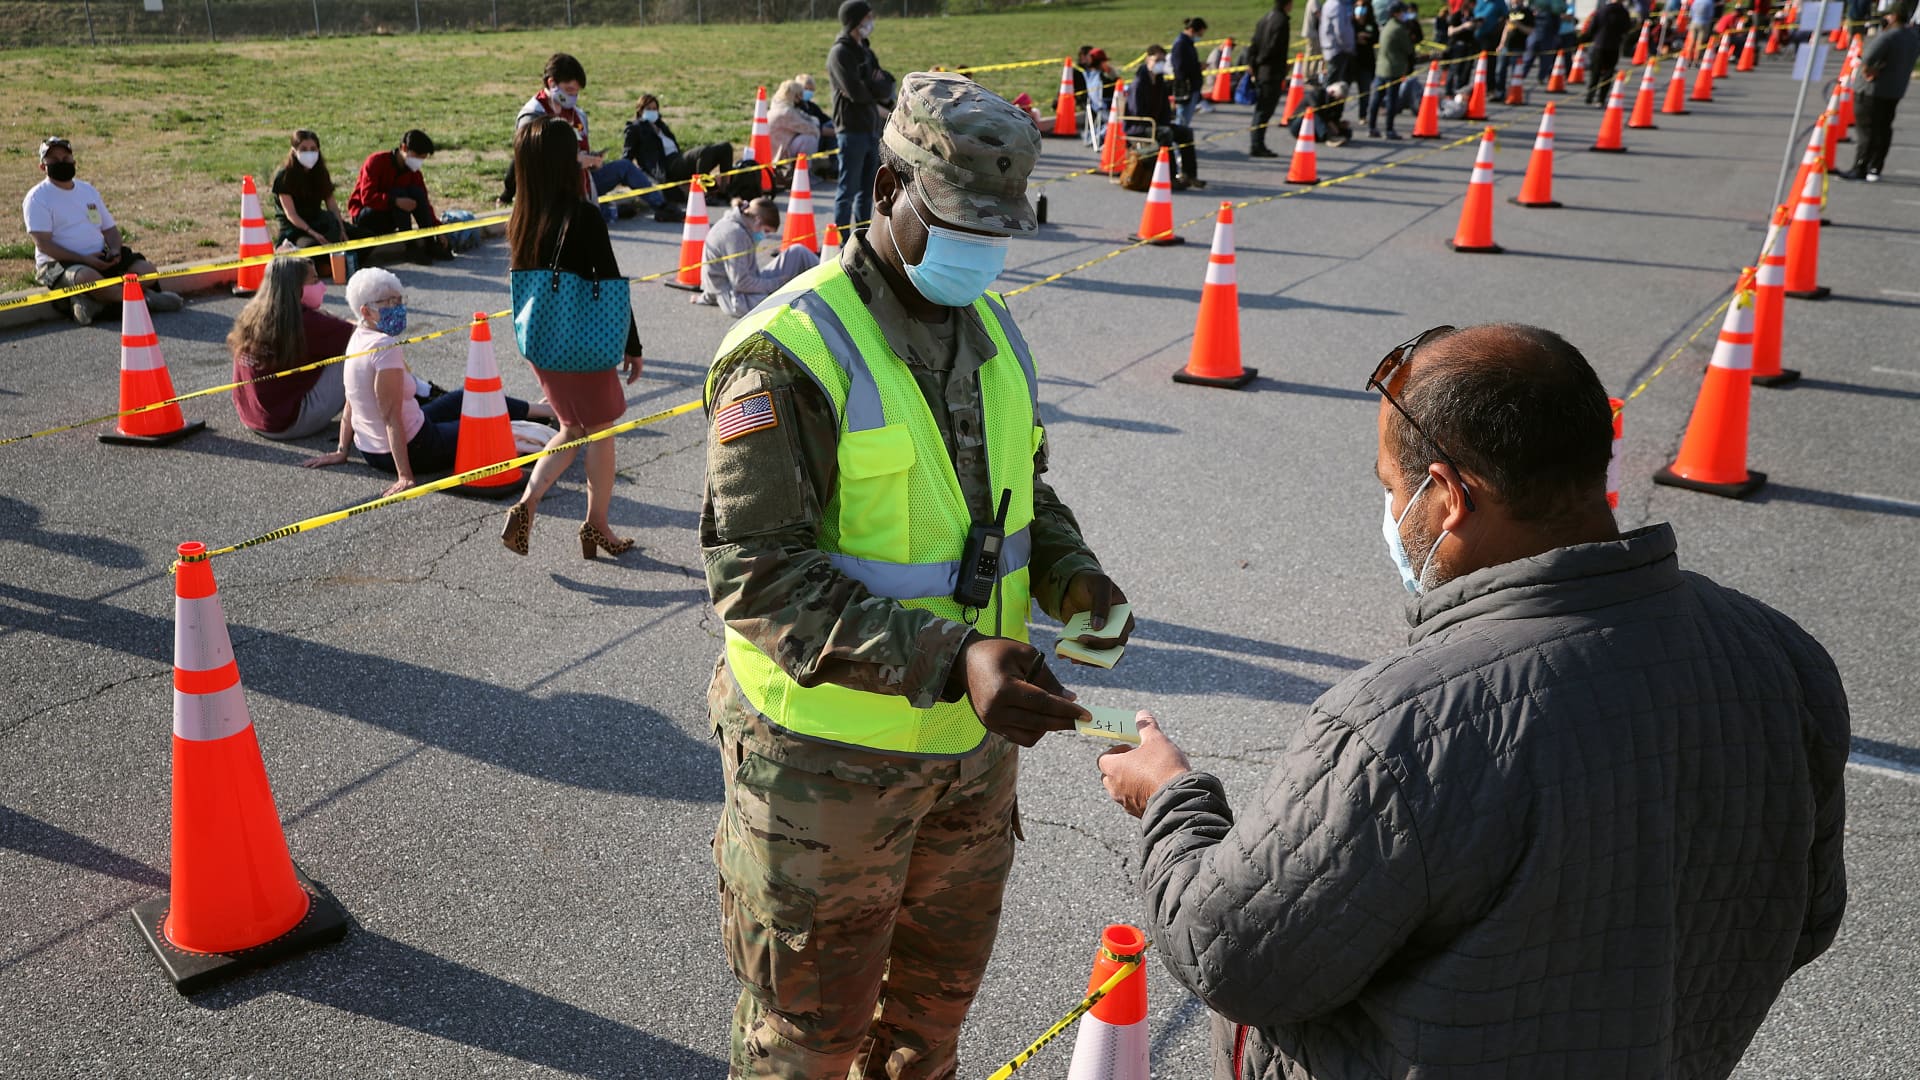 A member of the Maryland National Guard hands out Post-It notes with numbers to people arriving without appointments at the mass coronavirus vaccination site at Hagerstown Premium Outlets on April 07, 2021 in Hagerstown, Maryland.